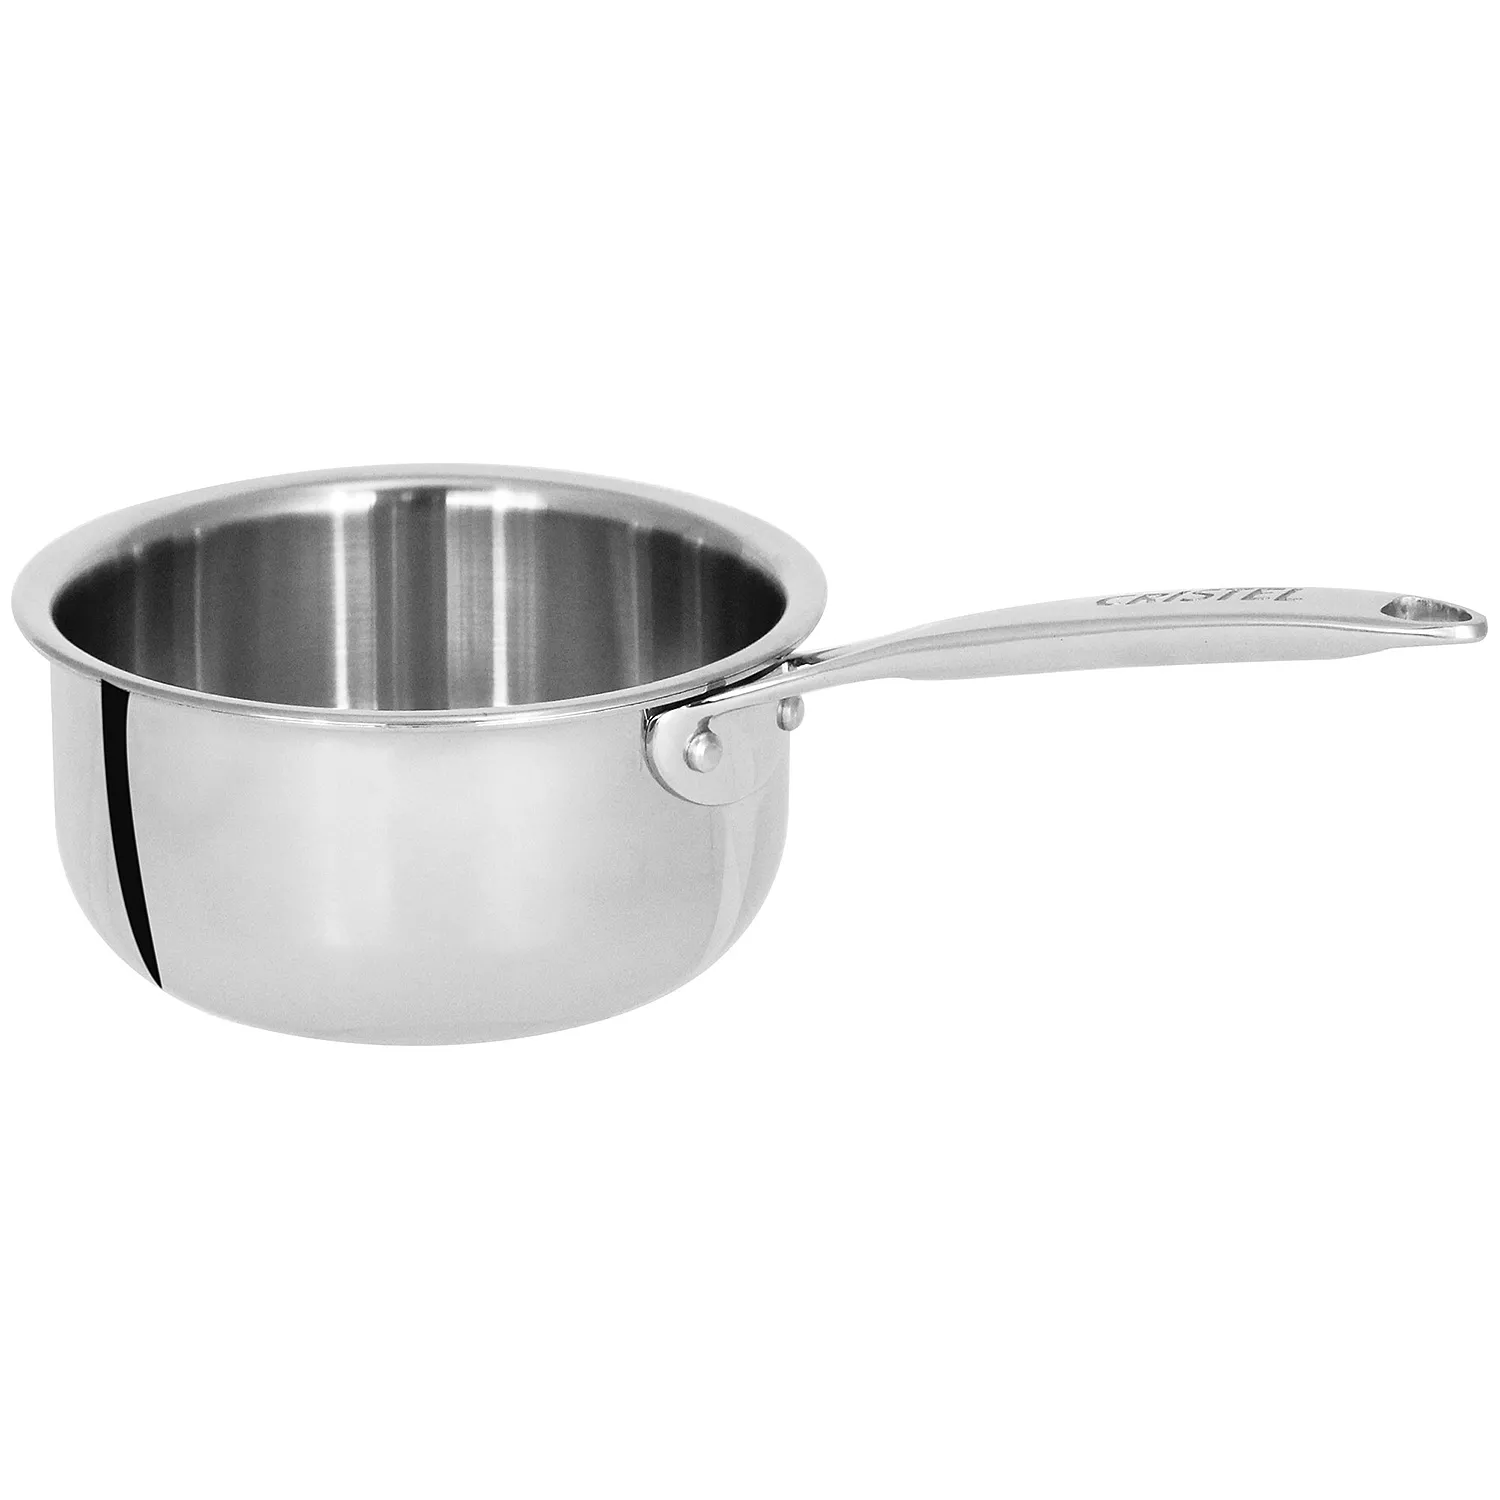  Saucepan, Stainless Steel Milk Pan 12cm, Soup Pot for Induction  and Oven, Non Stick Milk Pot, Dishwasher Safe Cookware(Sliver): Home &  Kitchen